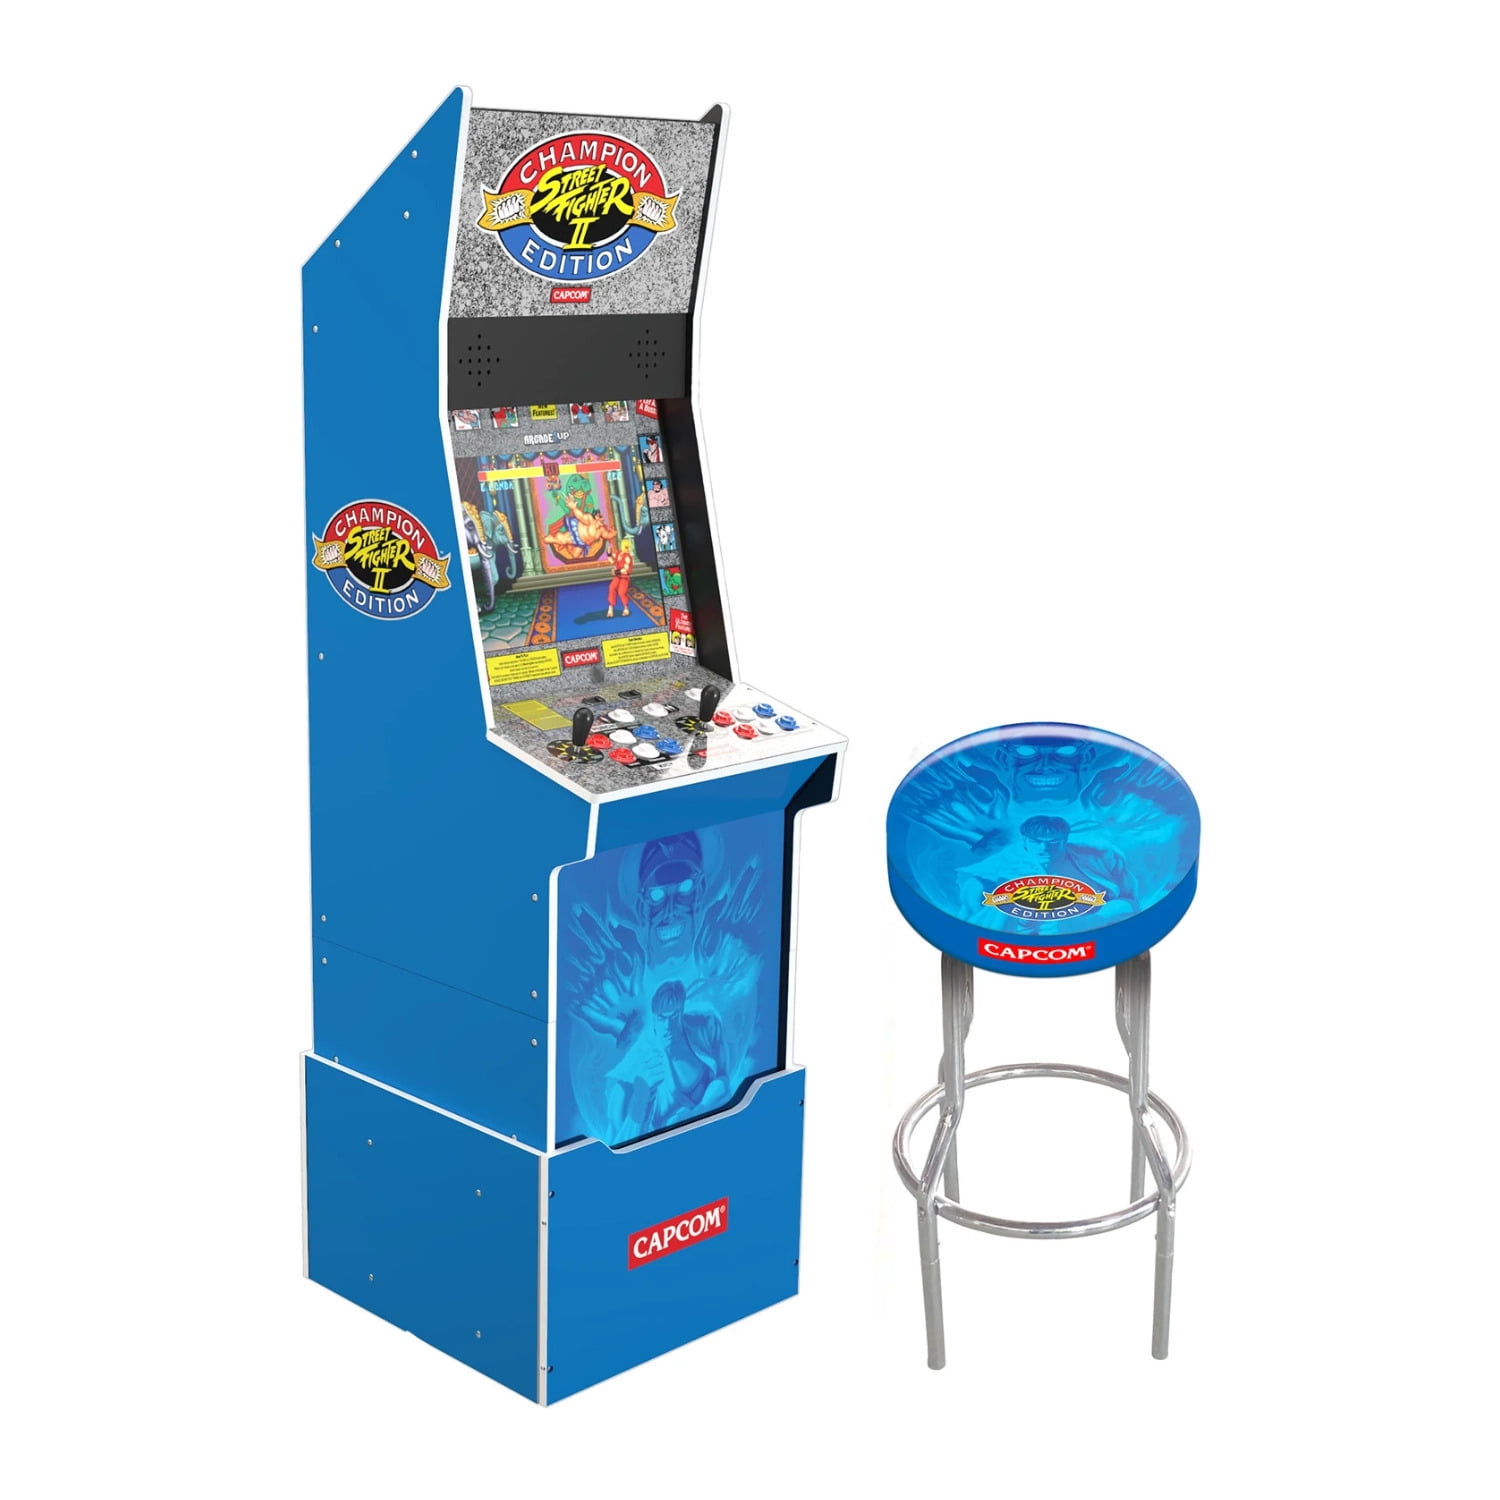 Arcade1Up Mortal Kombat II Deluxe Arcade Game, built for your home, with  5-foot-tall full-size stand-up cabinet, 14 classic games, and 17-inch screen